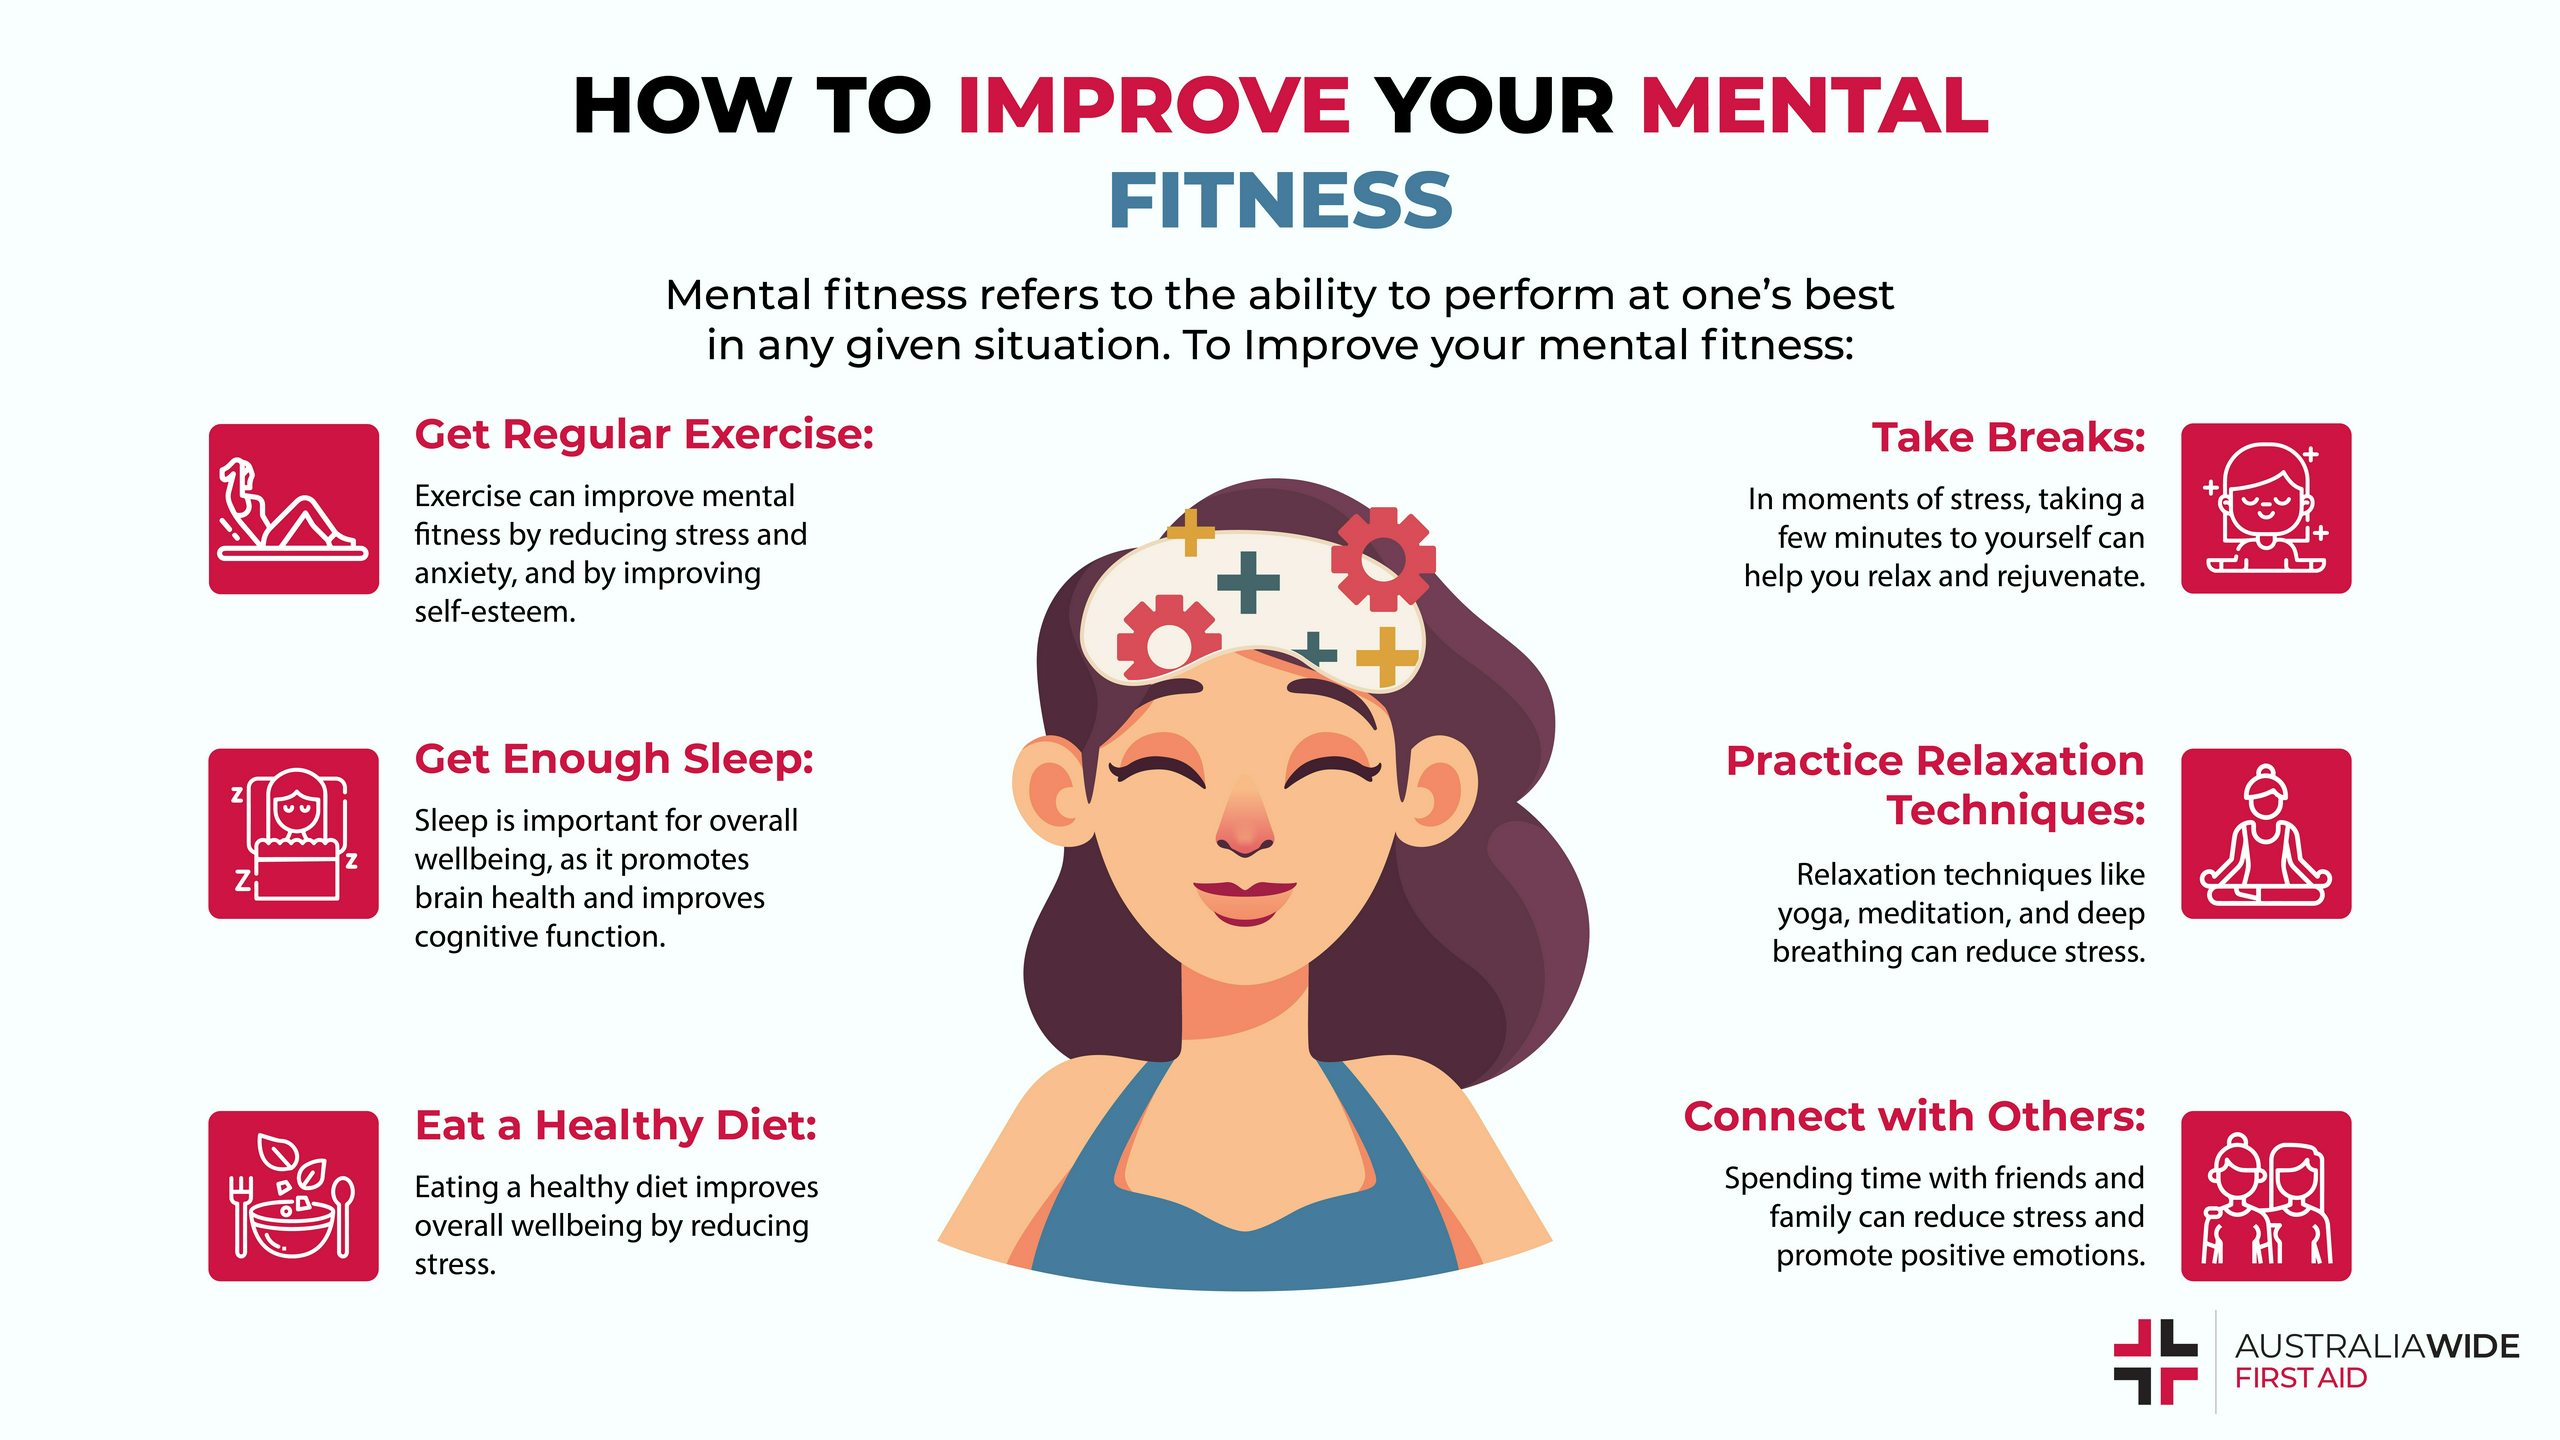 What is the importance of mental health in a healthy lifestyle?